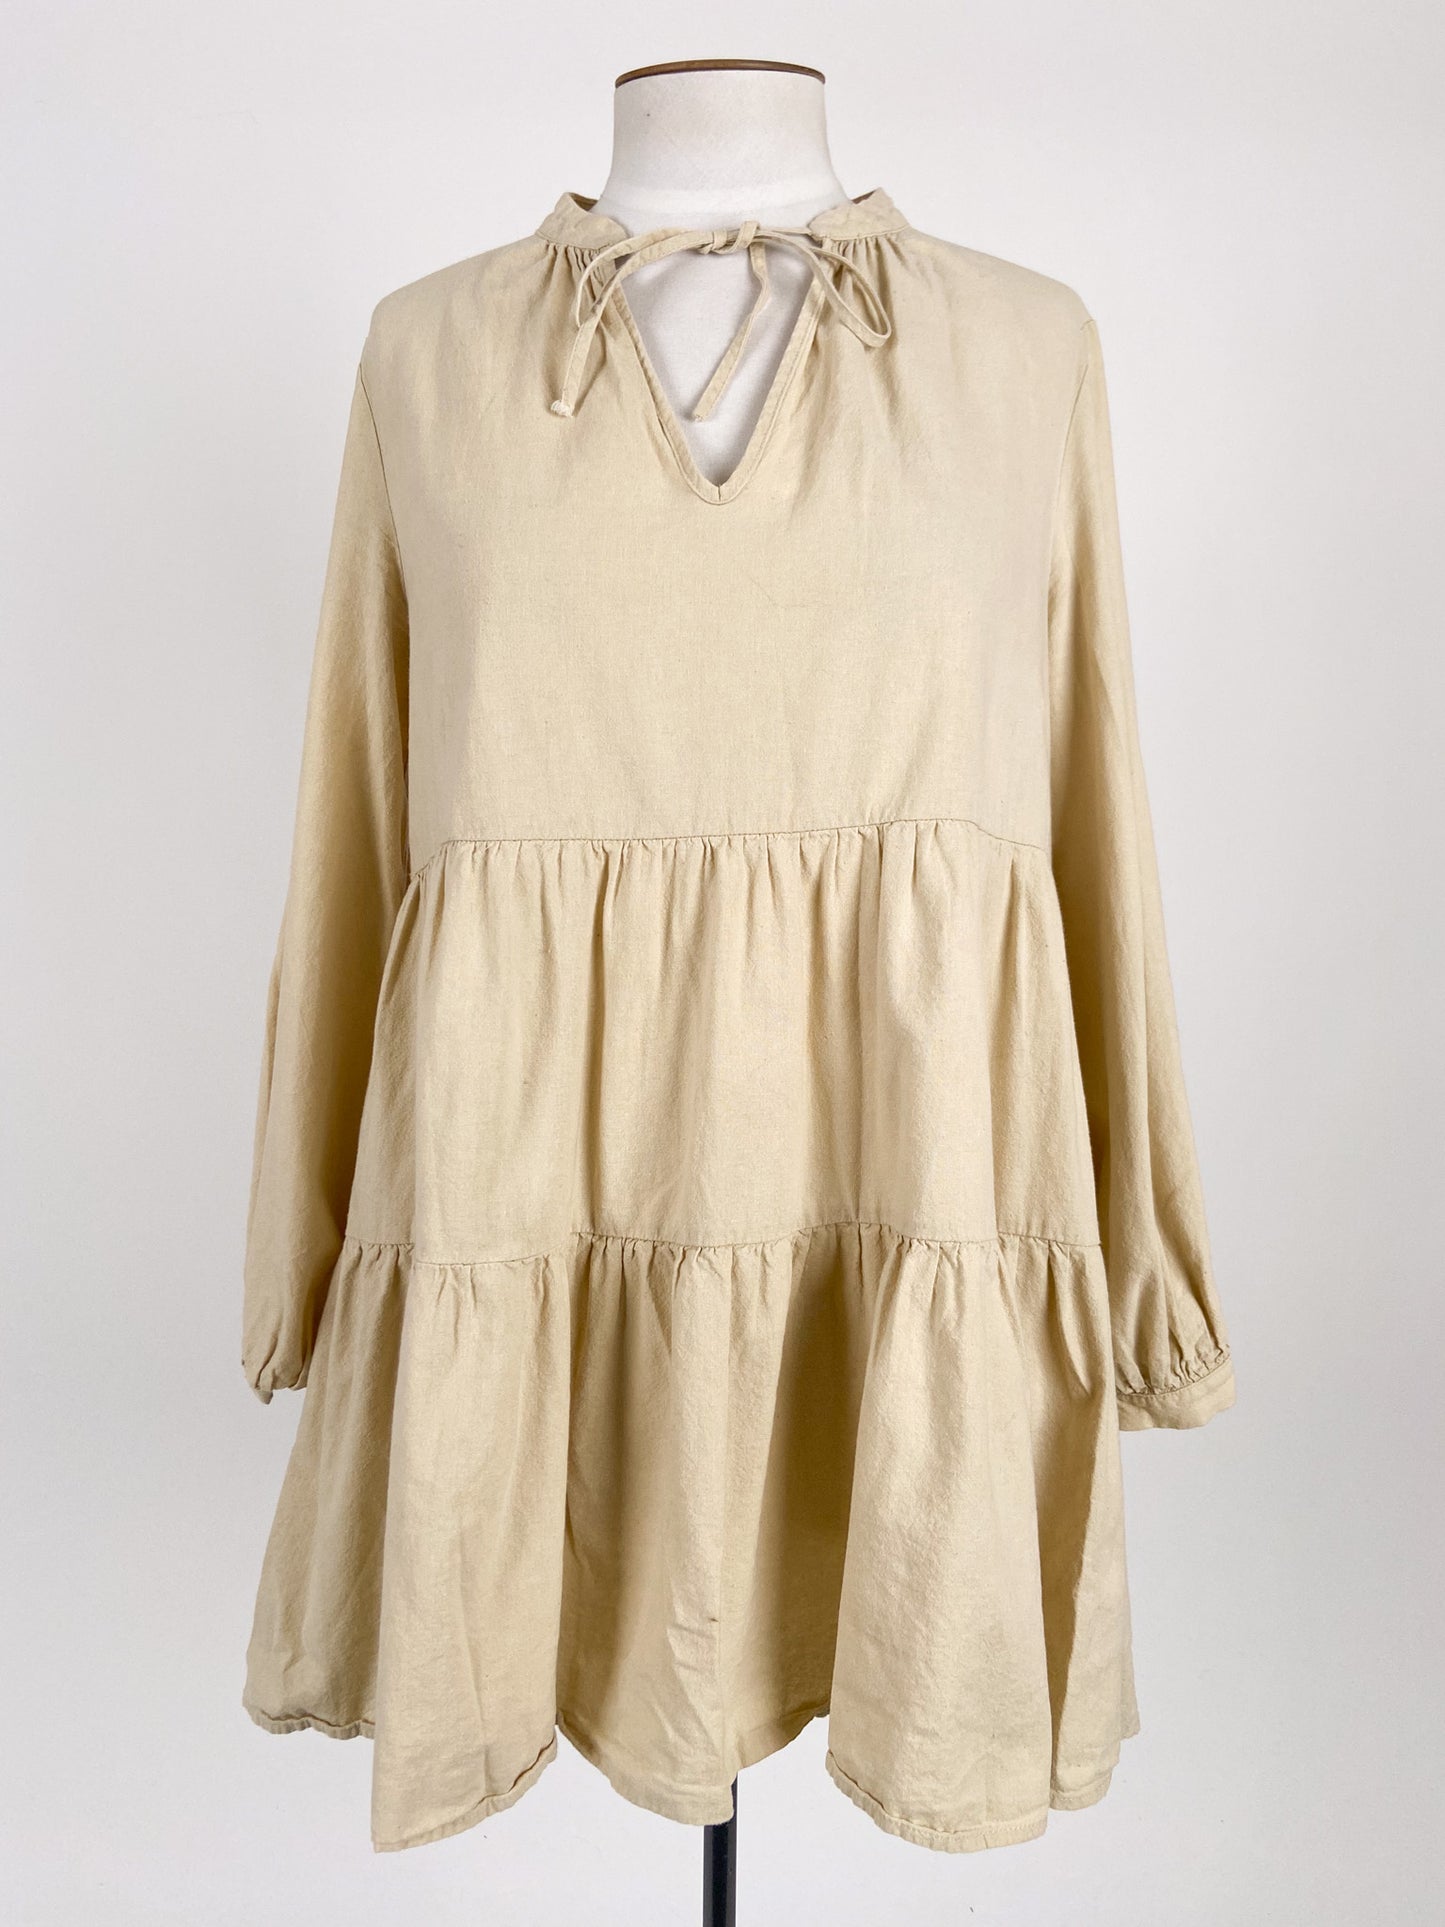 Atmos & Here | Beige Casual Dress | Size 14